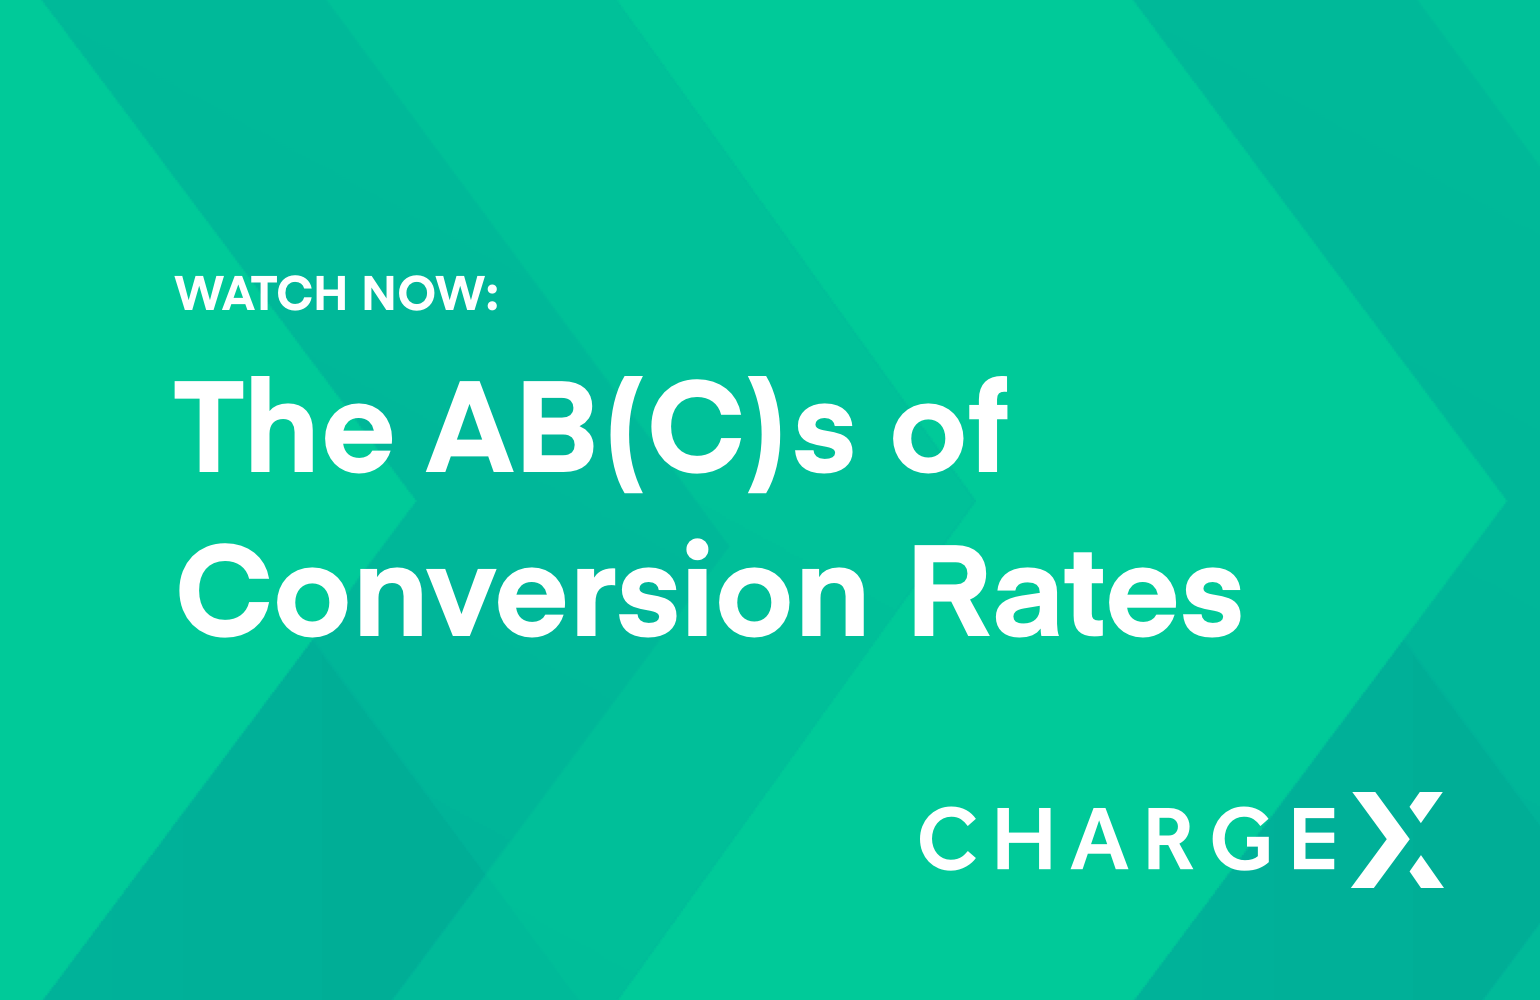 ChargeX: The AB(C)s of conversion rates